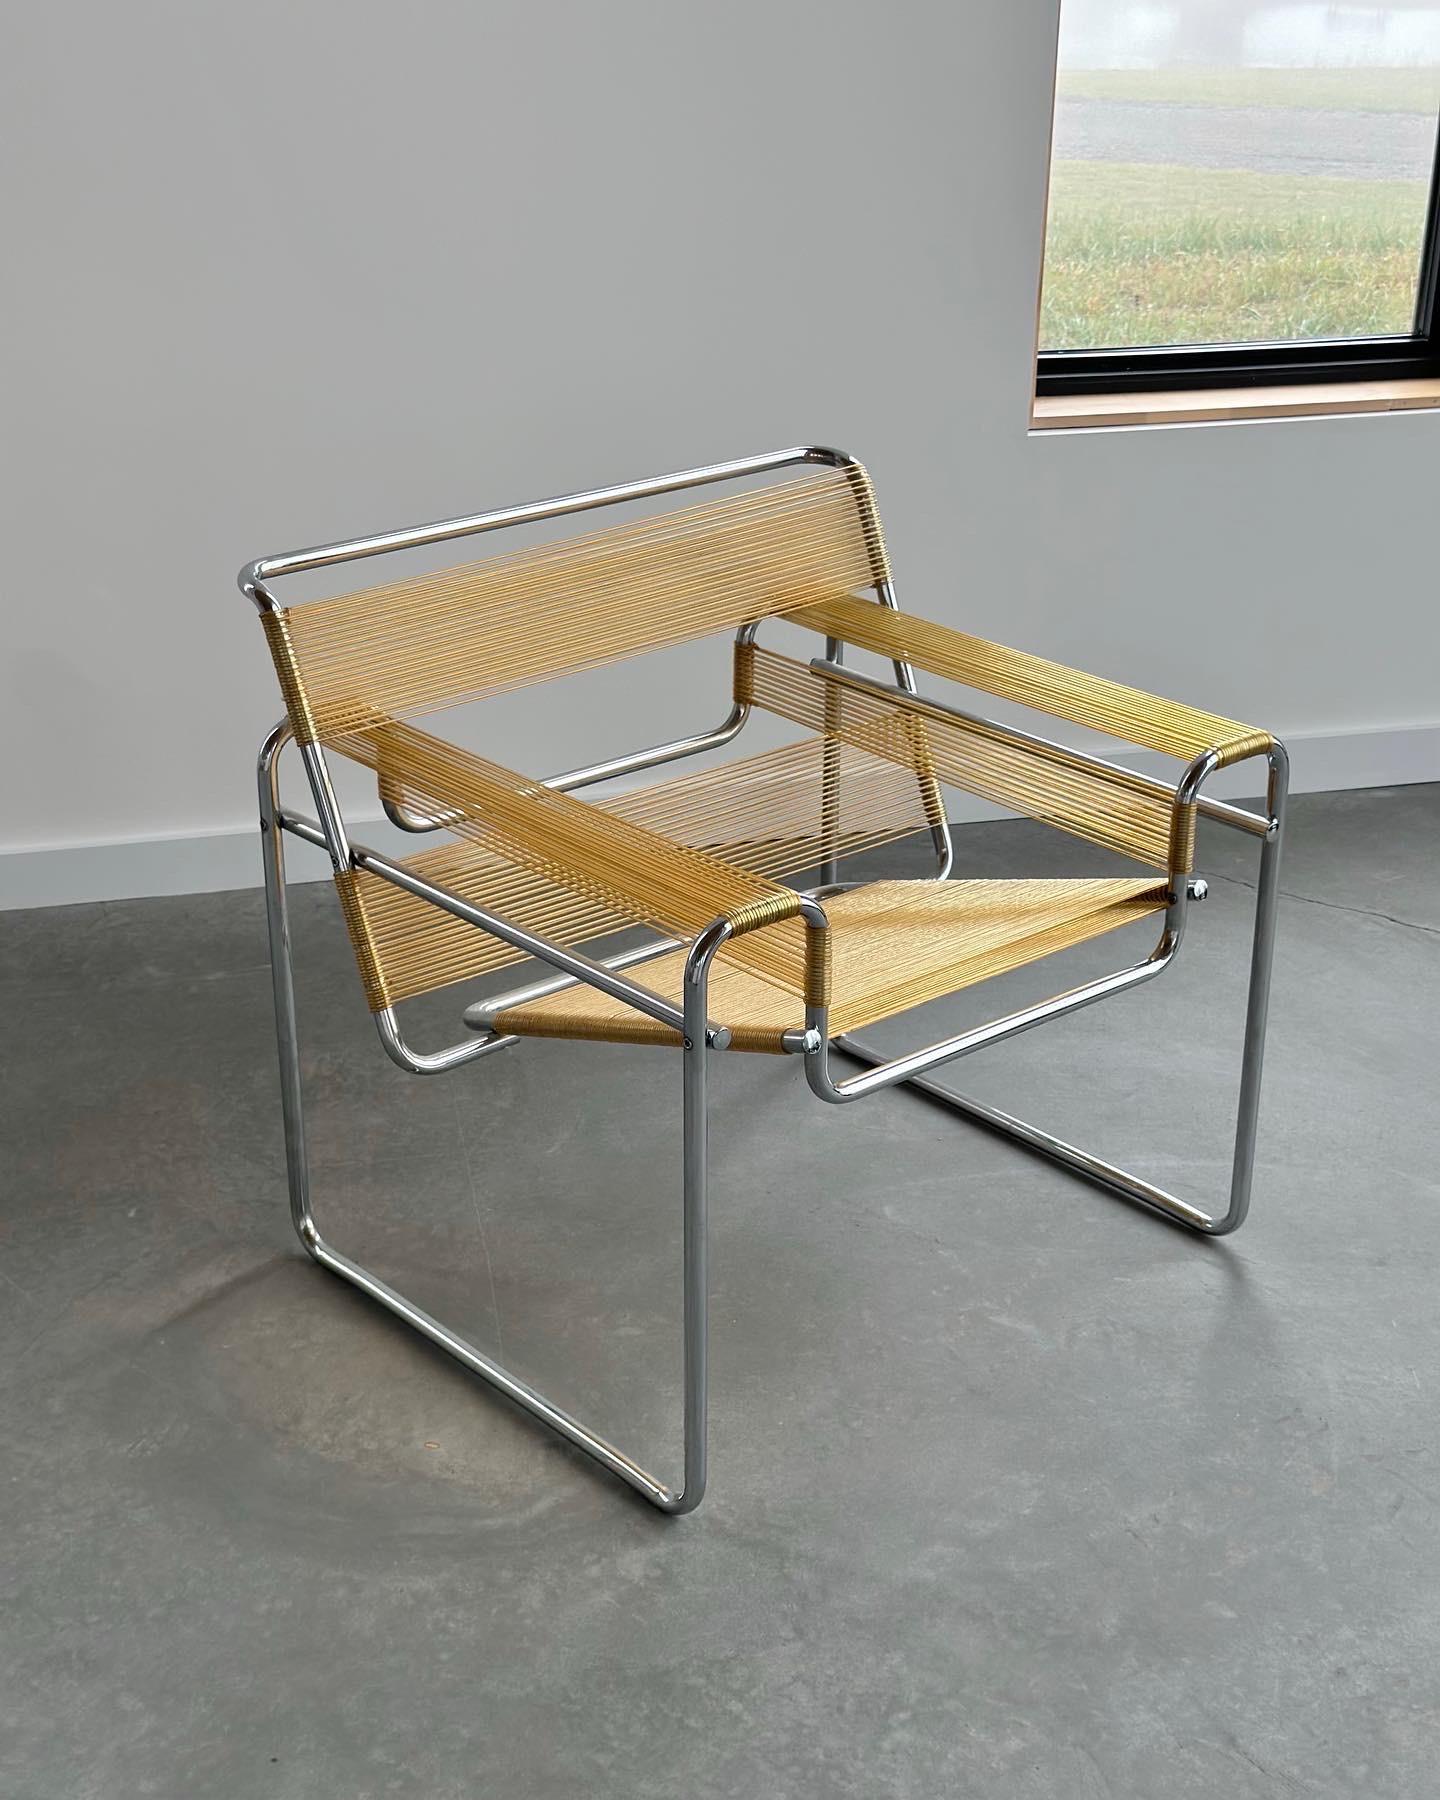 Incredibly cool spaghetti cord rendition of the Marcel Breuer's Wassily, a classic and iconic piece of furniture that blends style and functionality. The chair features a sleek and minimalist design, with a frame made from polished chrome steel and